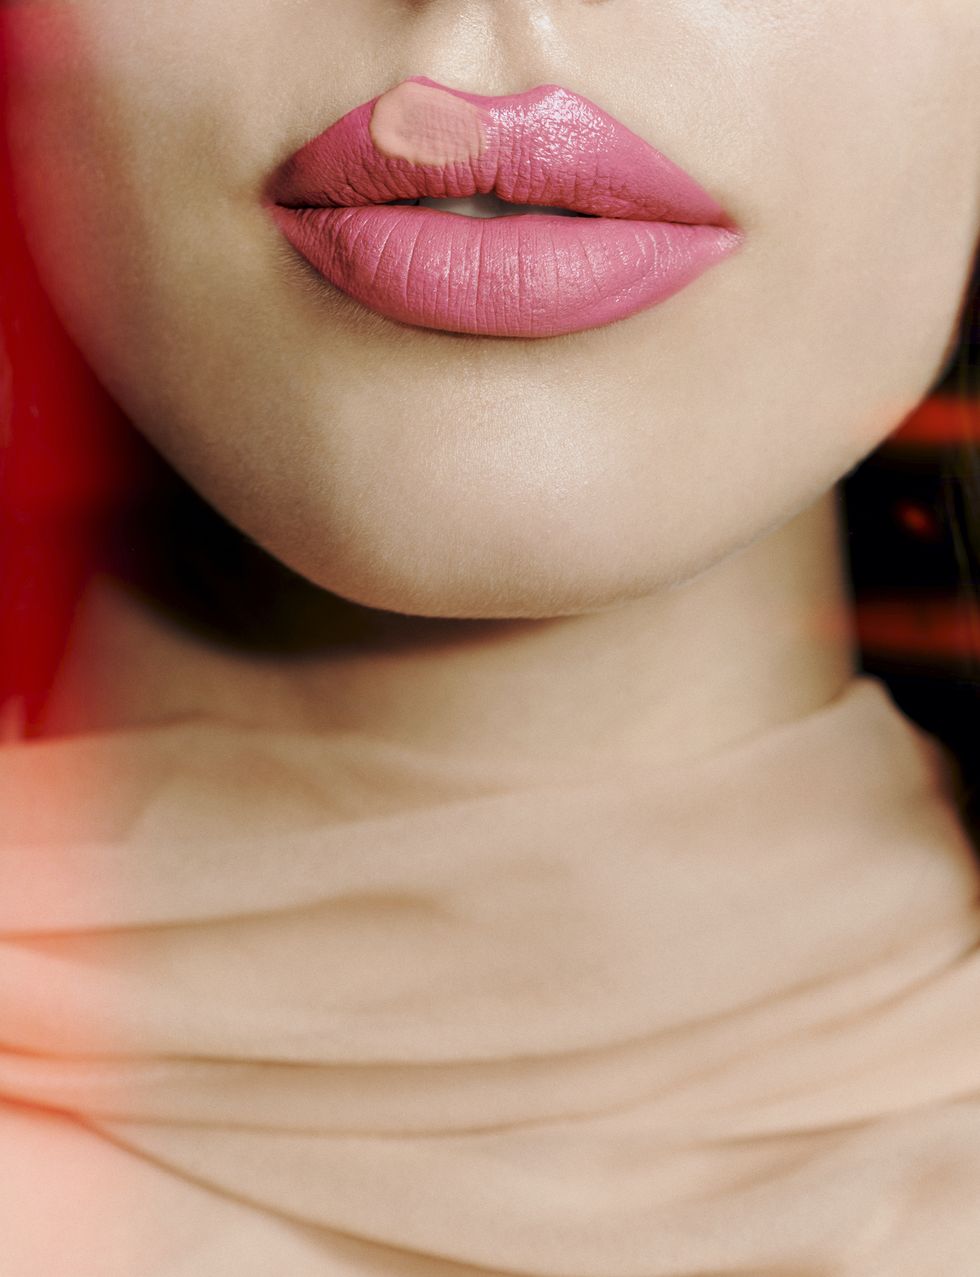 a close up of a lips